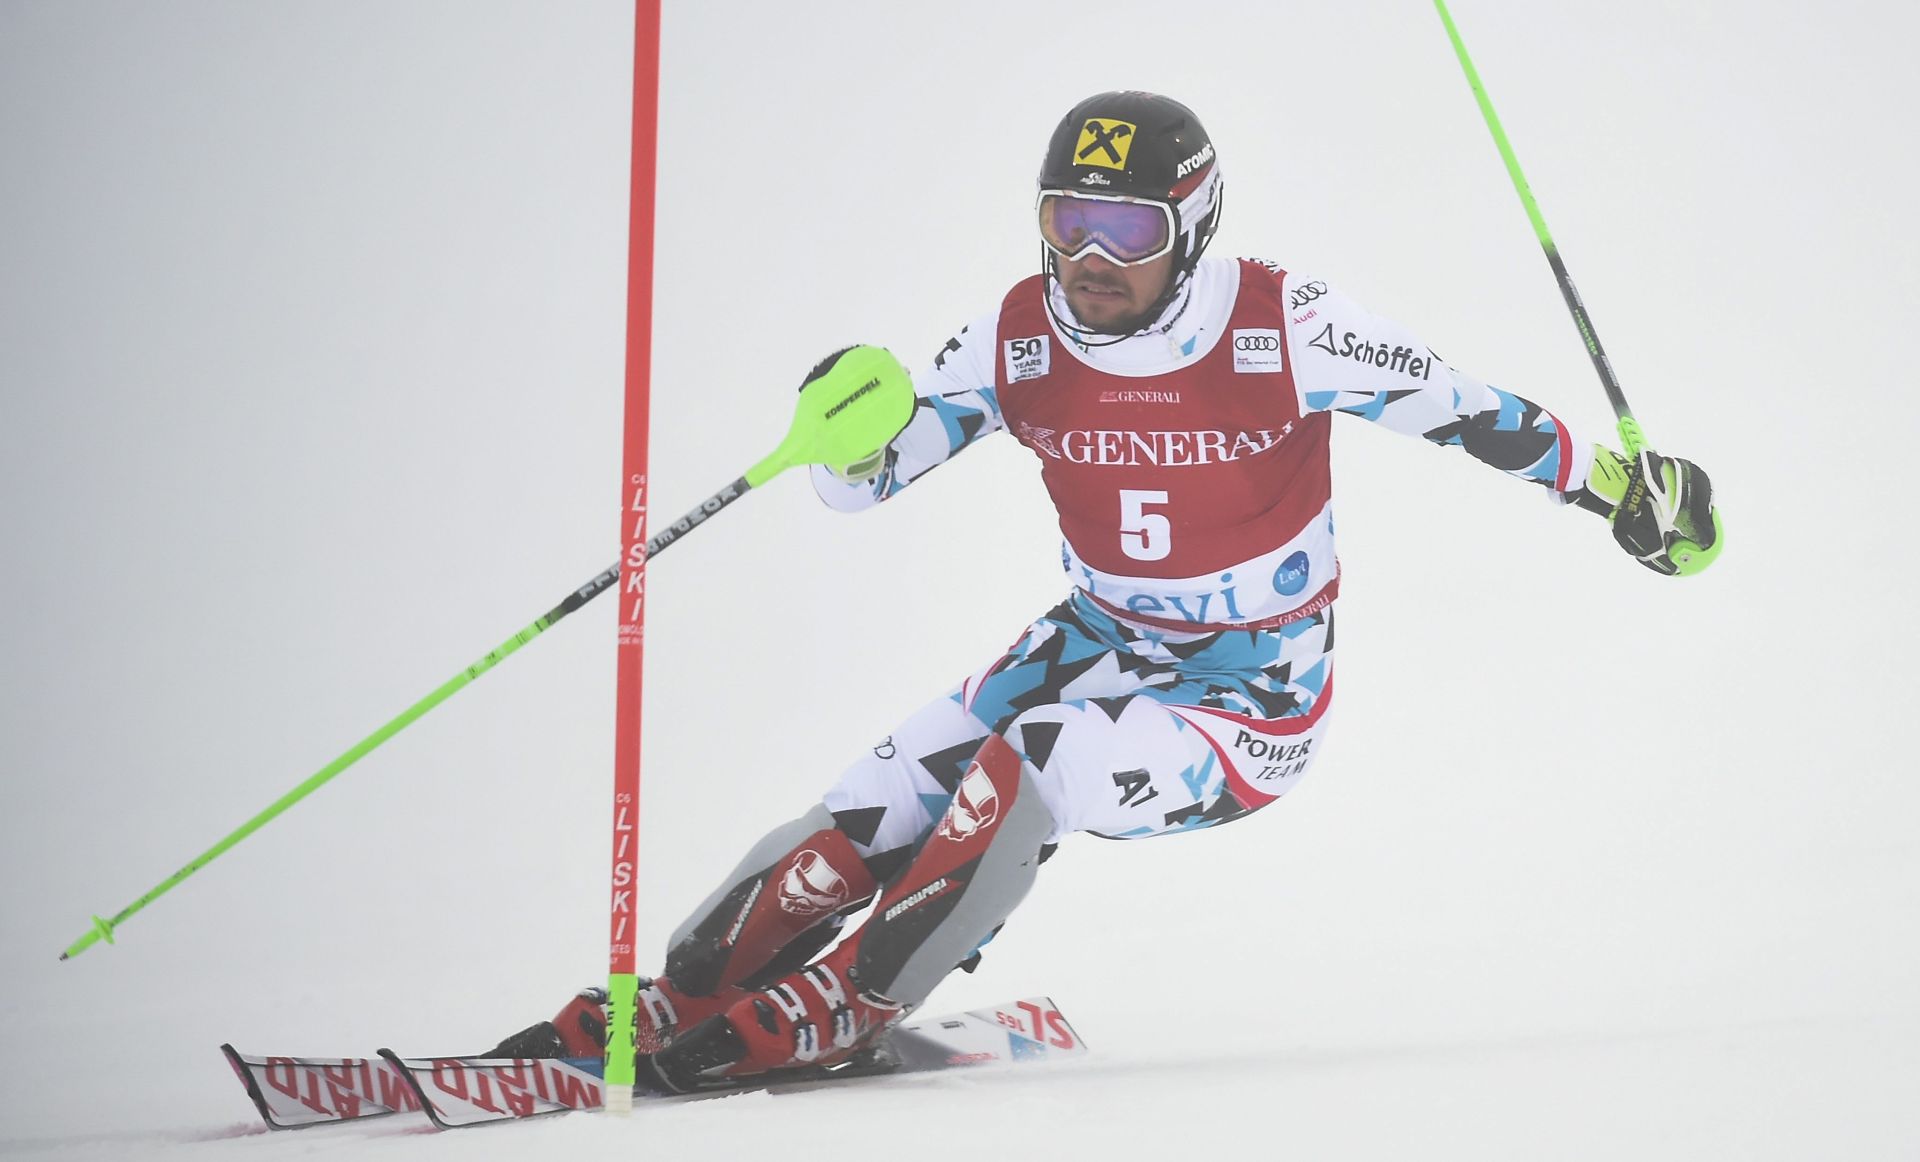 epa05629359 Marcel Hirscher of Austria clears a gate during the Men's Slalom race at the FIS Alpine Skiing World Cup event in Levi, Finland, 13 November 2016.  EPA/MARKKU OJALA FINLAND OUT